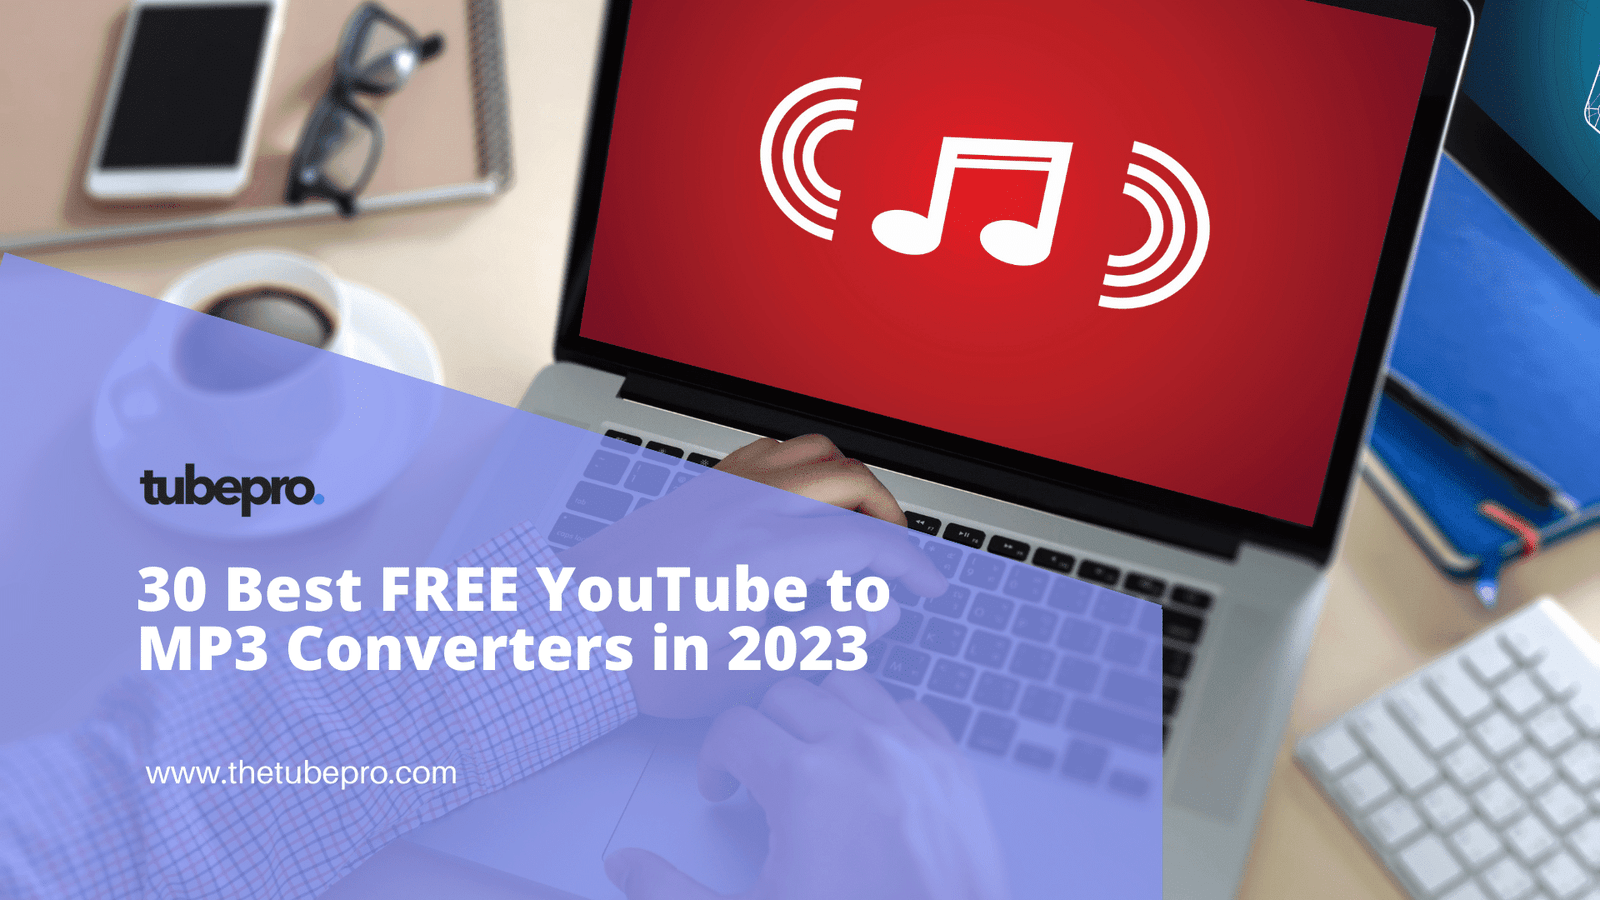 30 Best FREE YouTube to MP3 Converters in 2023